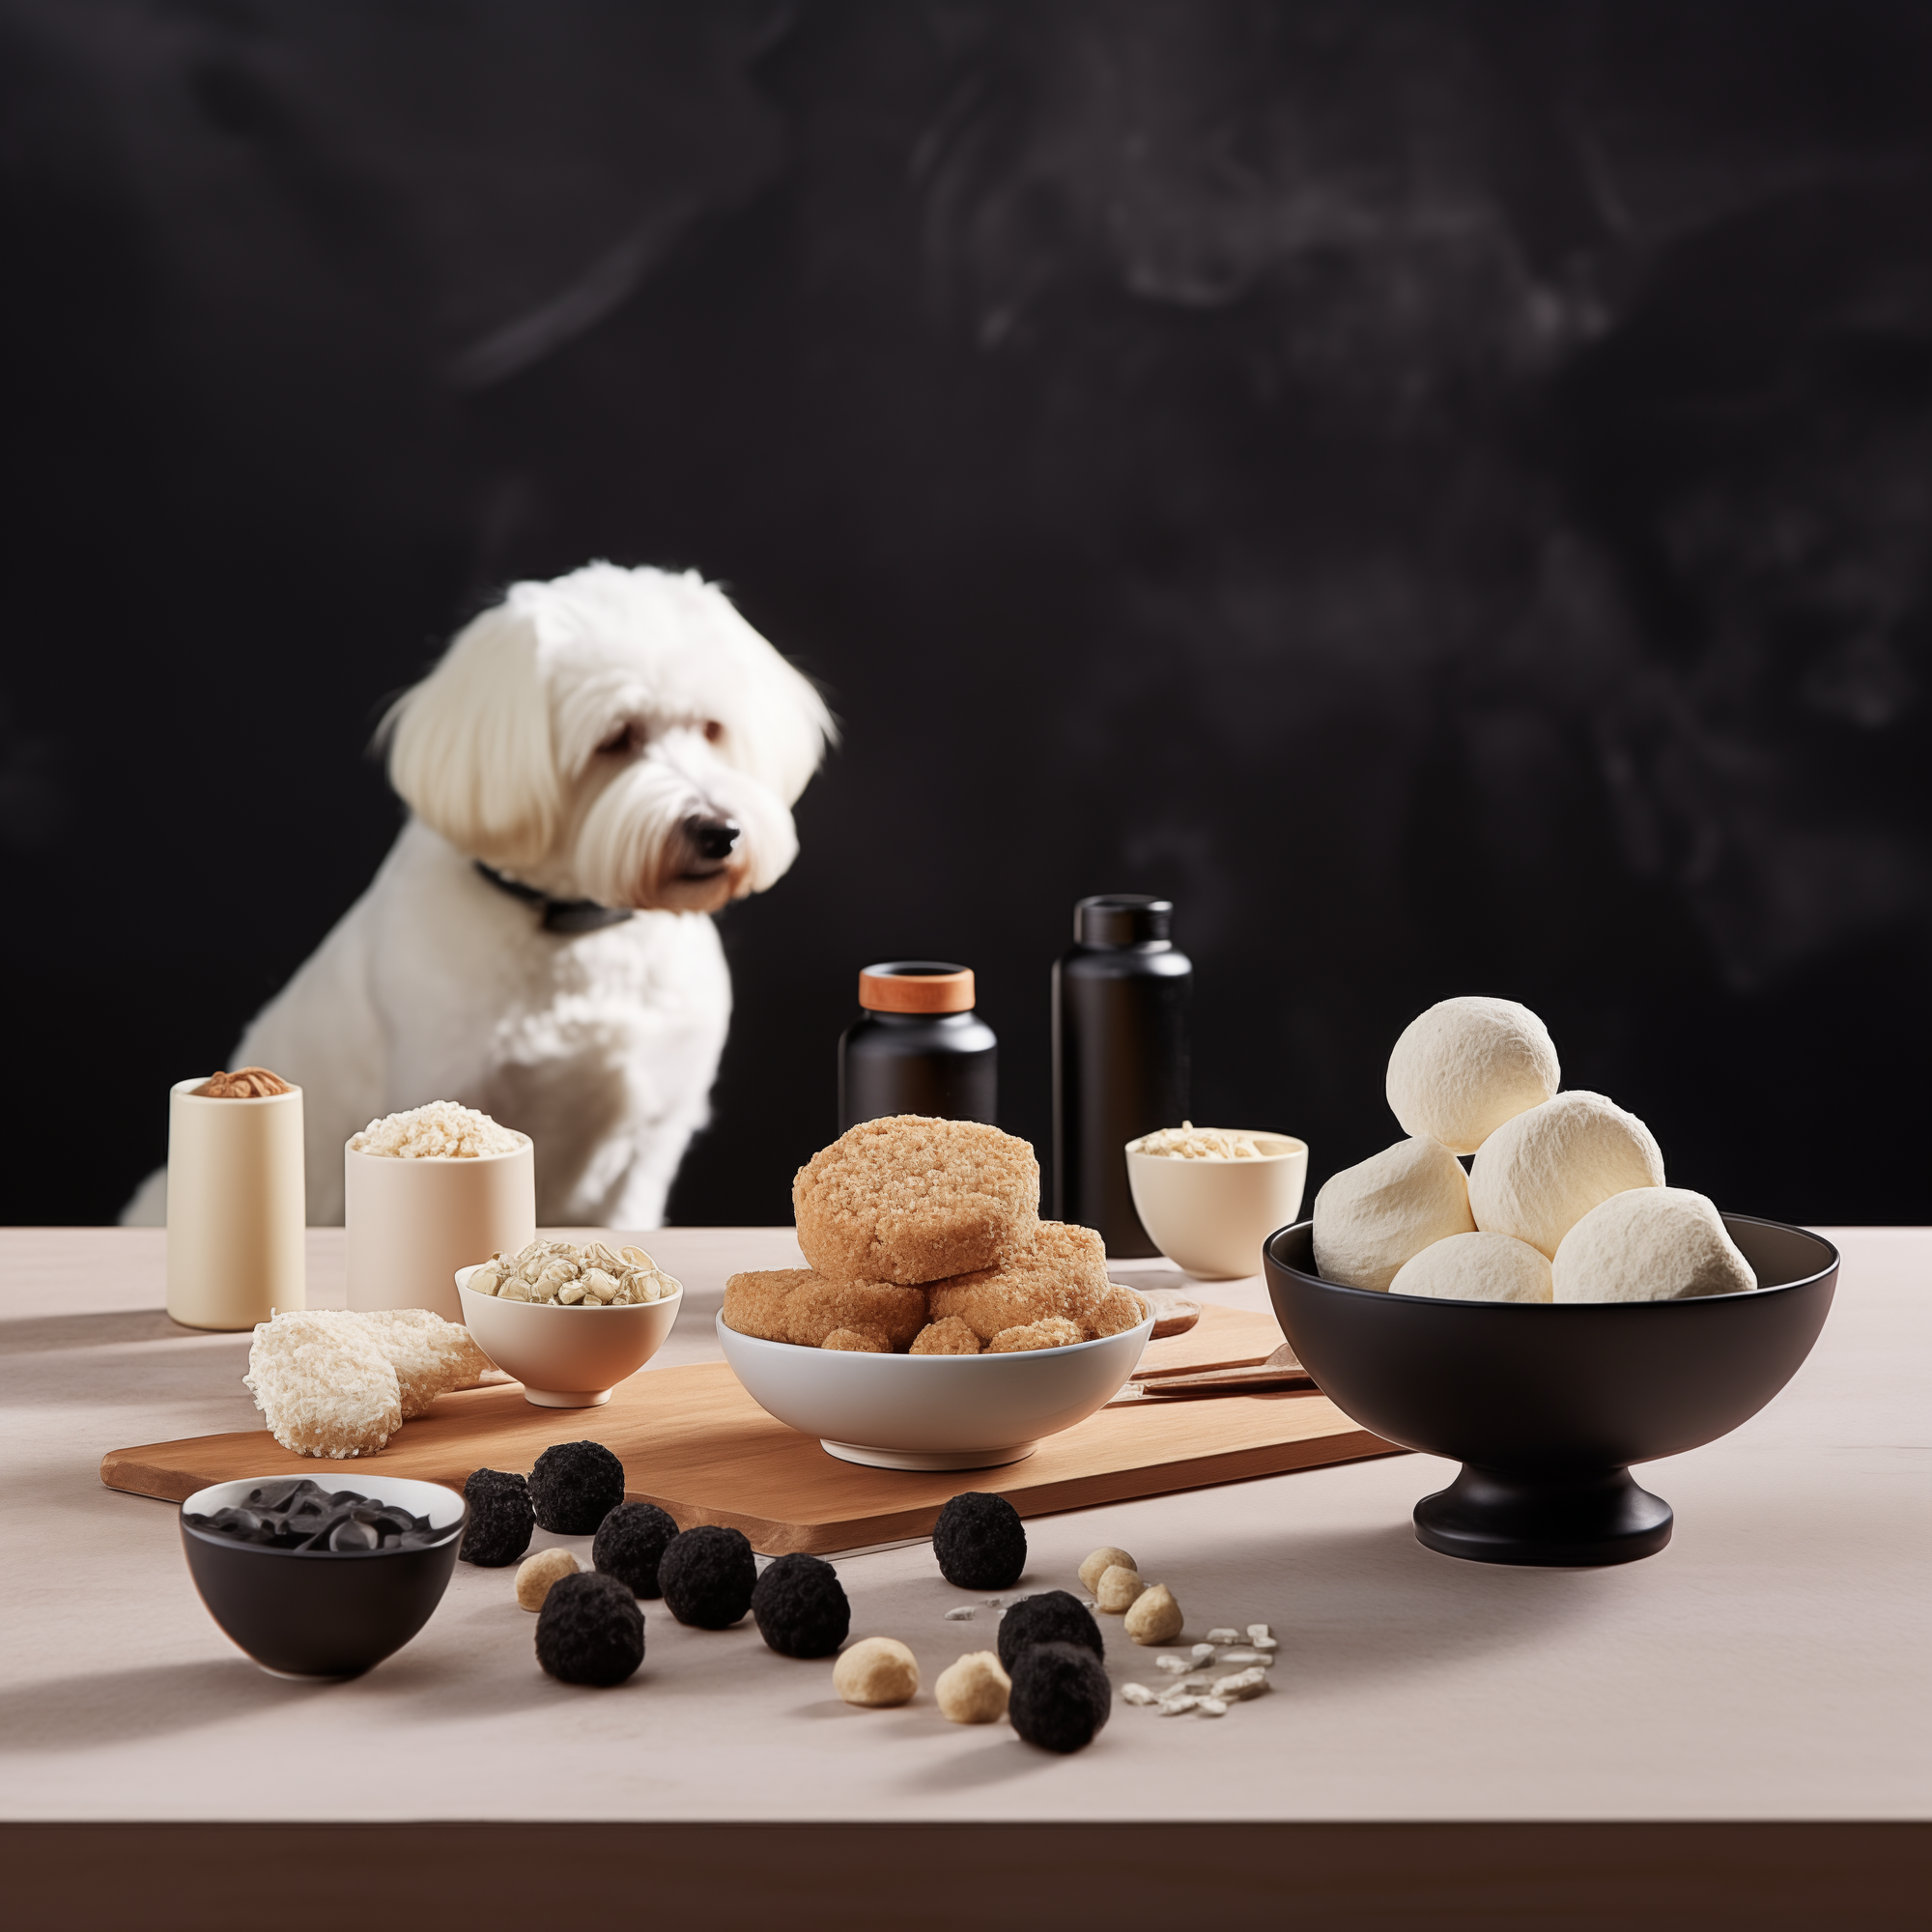 Paws Club Delights: Homemade Goat Milk Treats for Your Furry Family